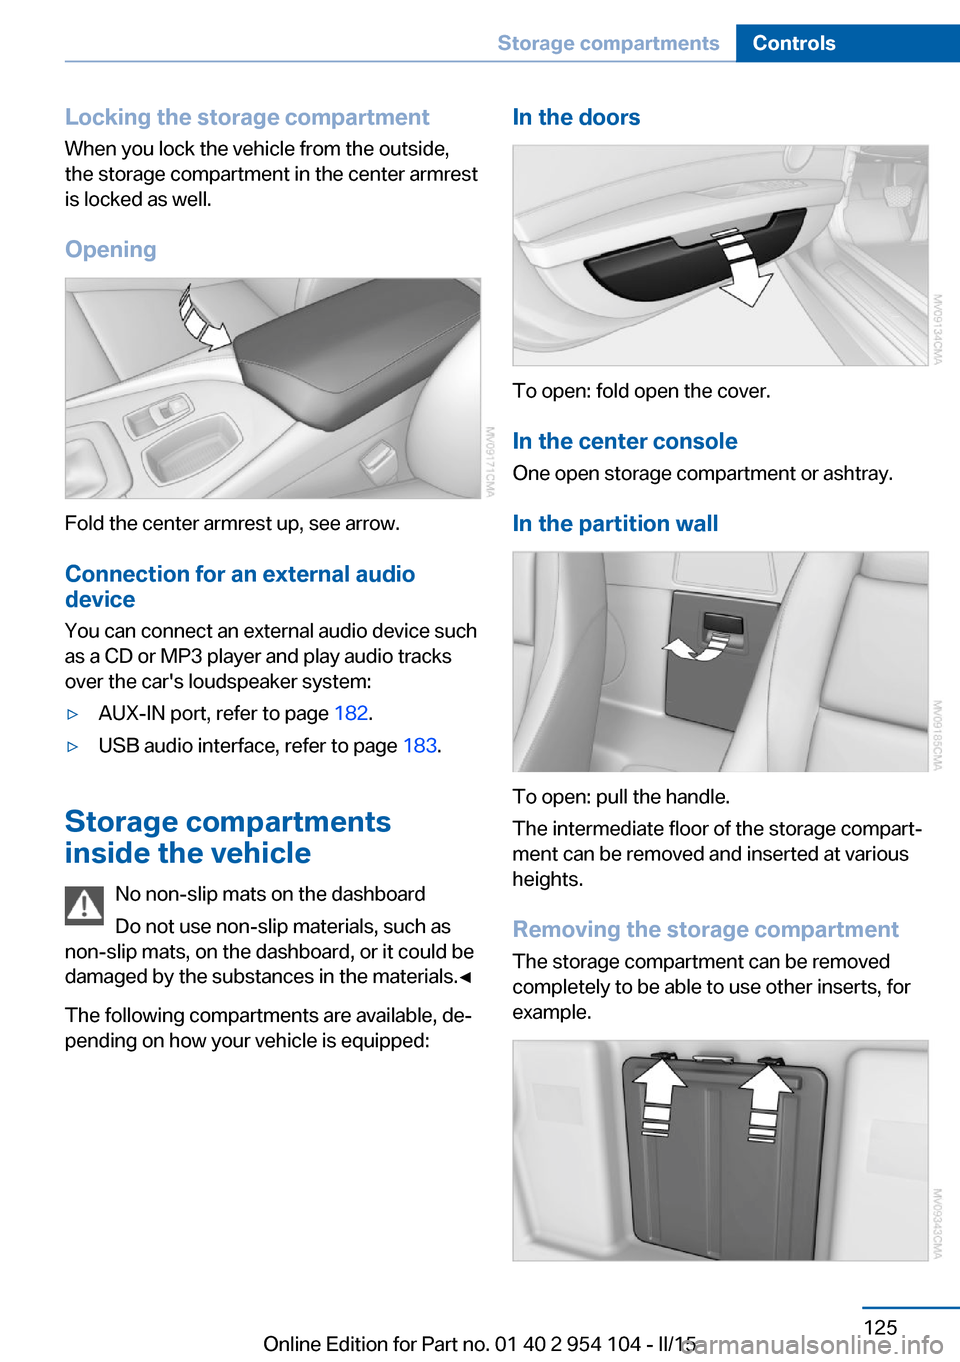 BMW Z4 2015 E89 Owners Guide Locking the storage compartment
When you lock the vehicle from the outside,
the storage compartment in the center armrest
is locked as well.
Opening
Fold the center armrest up, see arrow.Connection fo